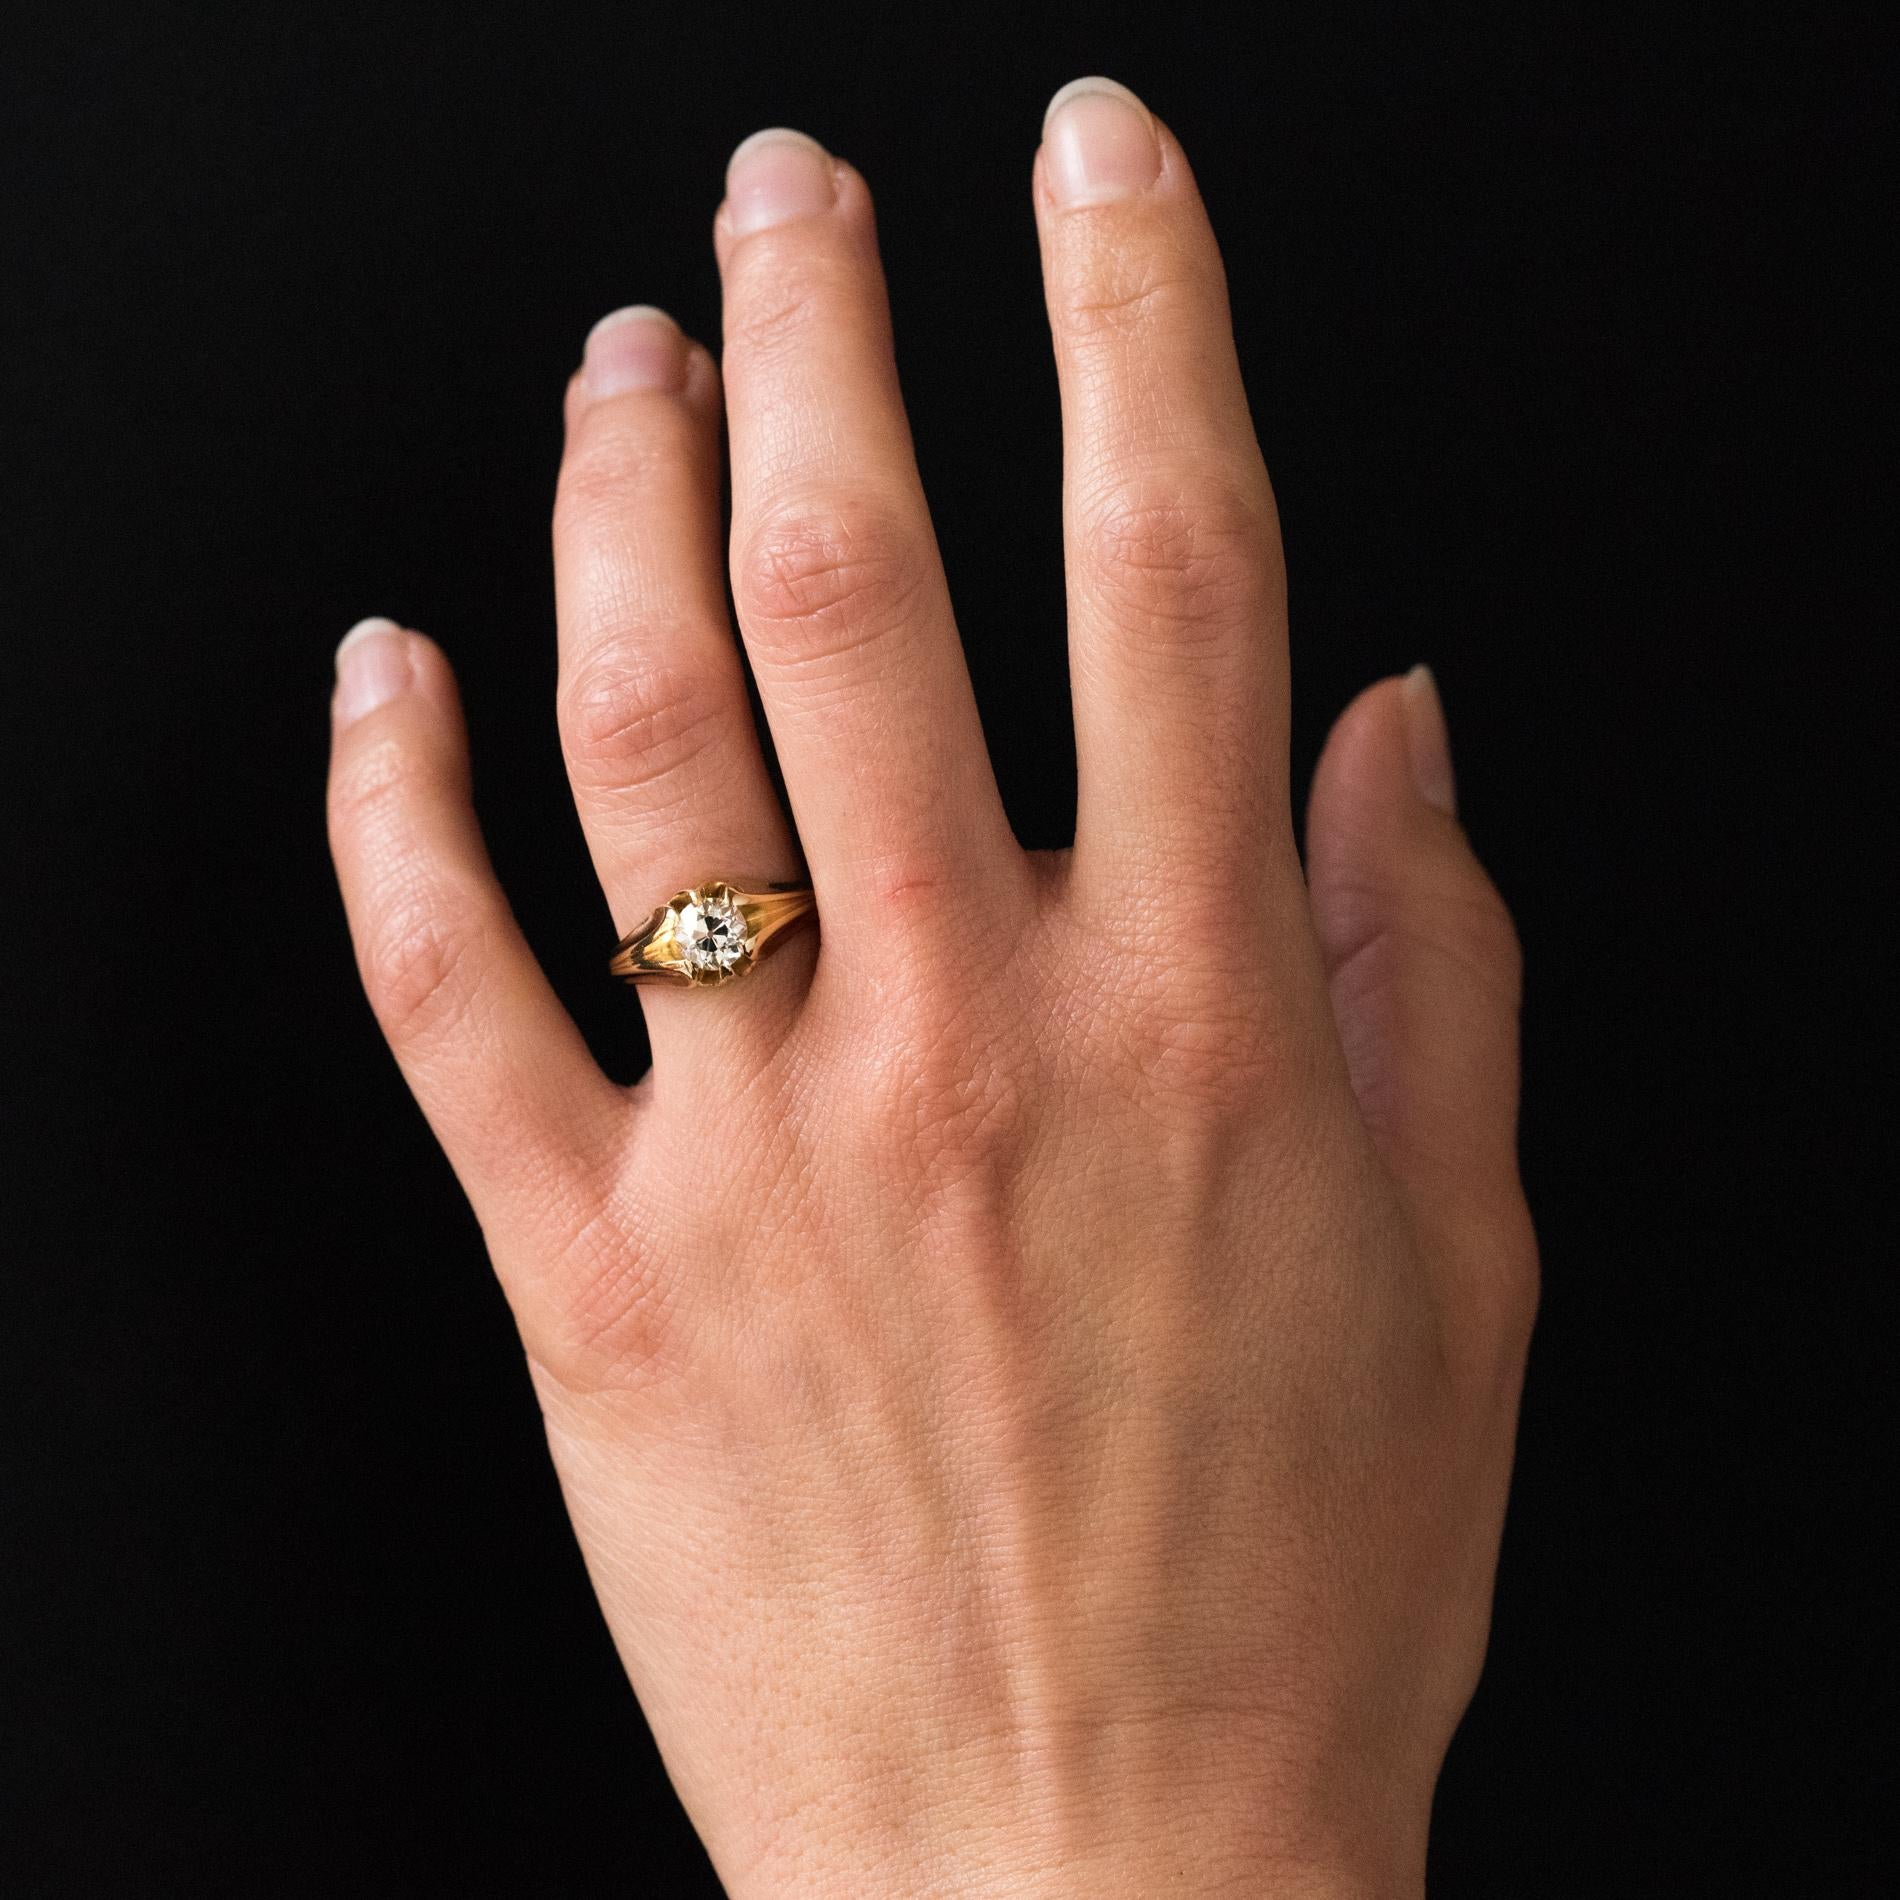 Ring in 18 karat yellow gold, eagle's head hallmark.
This ring is adorned on the top with an antique brilliant- cut diamond, set with claws. It is supported on both sides of two throats that go down to the base of the ring.
Total weight of the